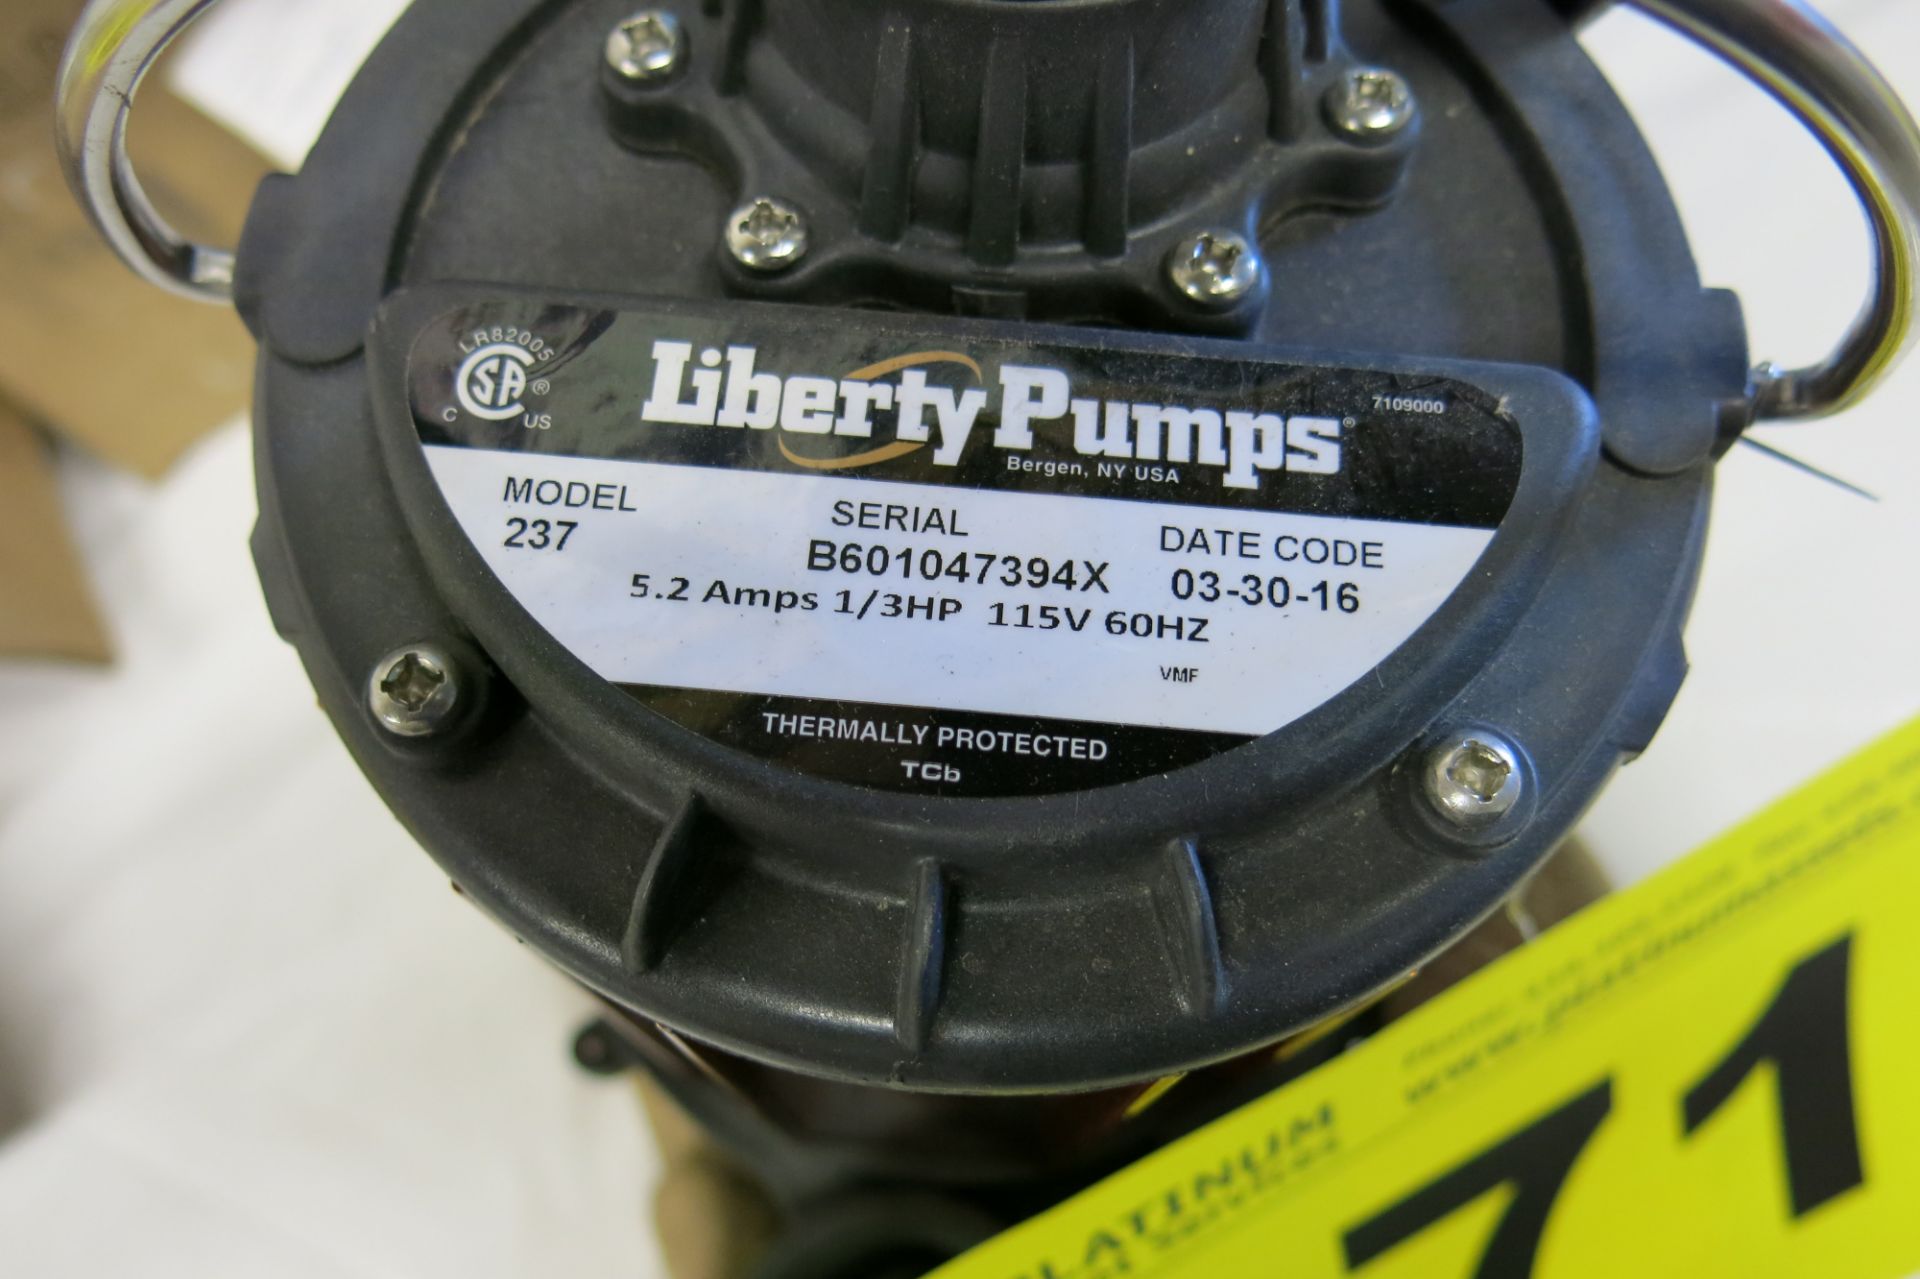 LIBERTY PUMPS, 237, 1/2 HP, SUMP PUMP, 2016, S/N B601047394X -NEW (LOCATED IN MISSISSAUGA) - Image 2 of 3